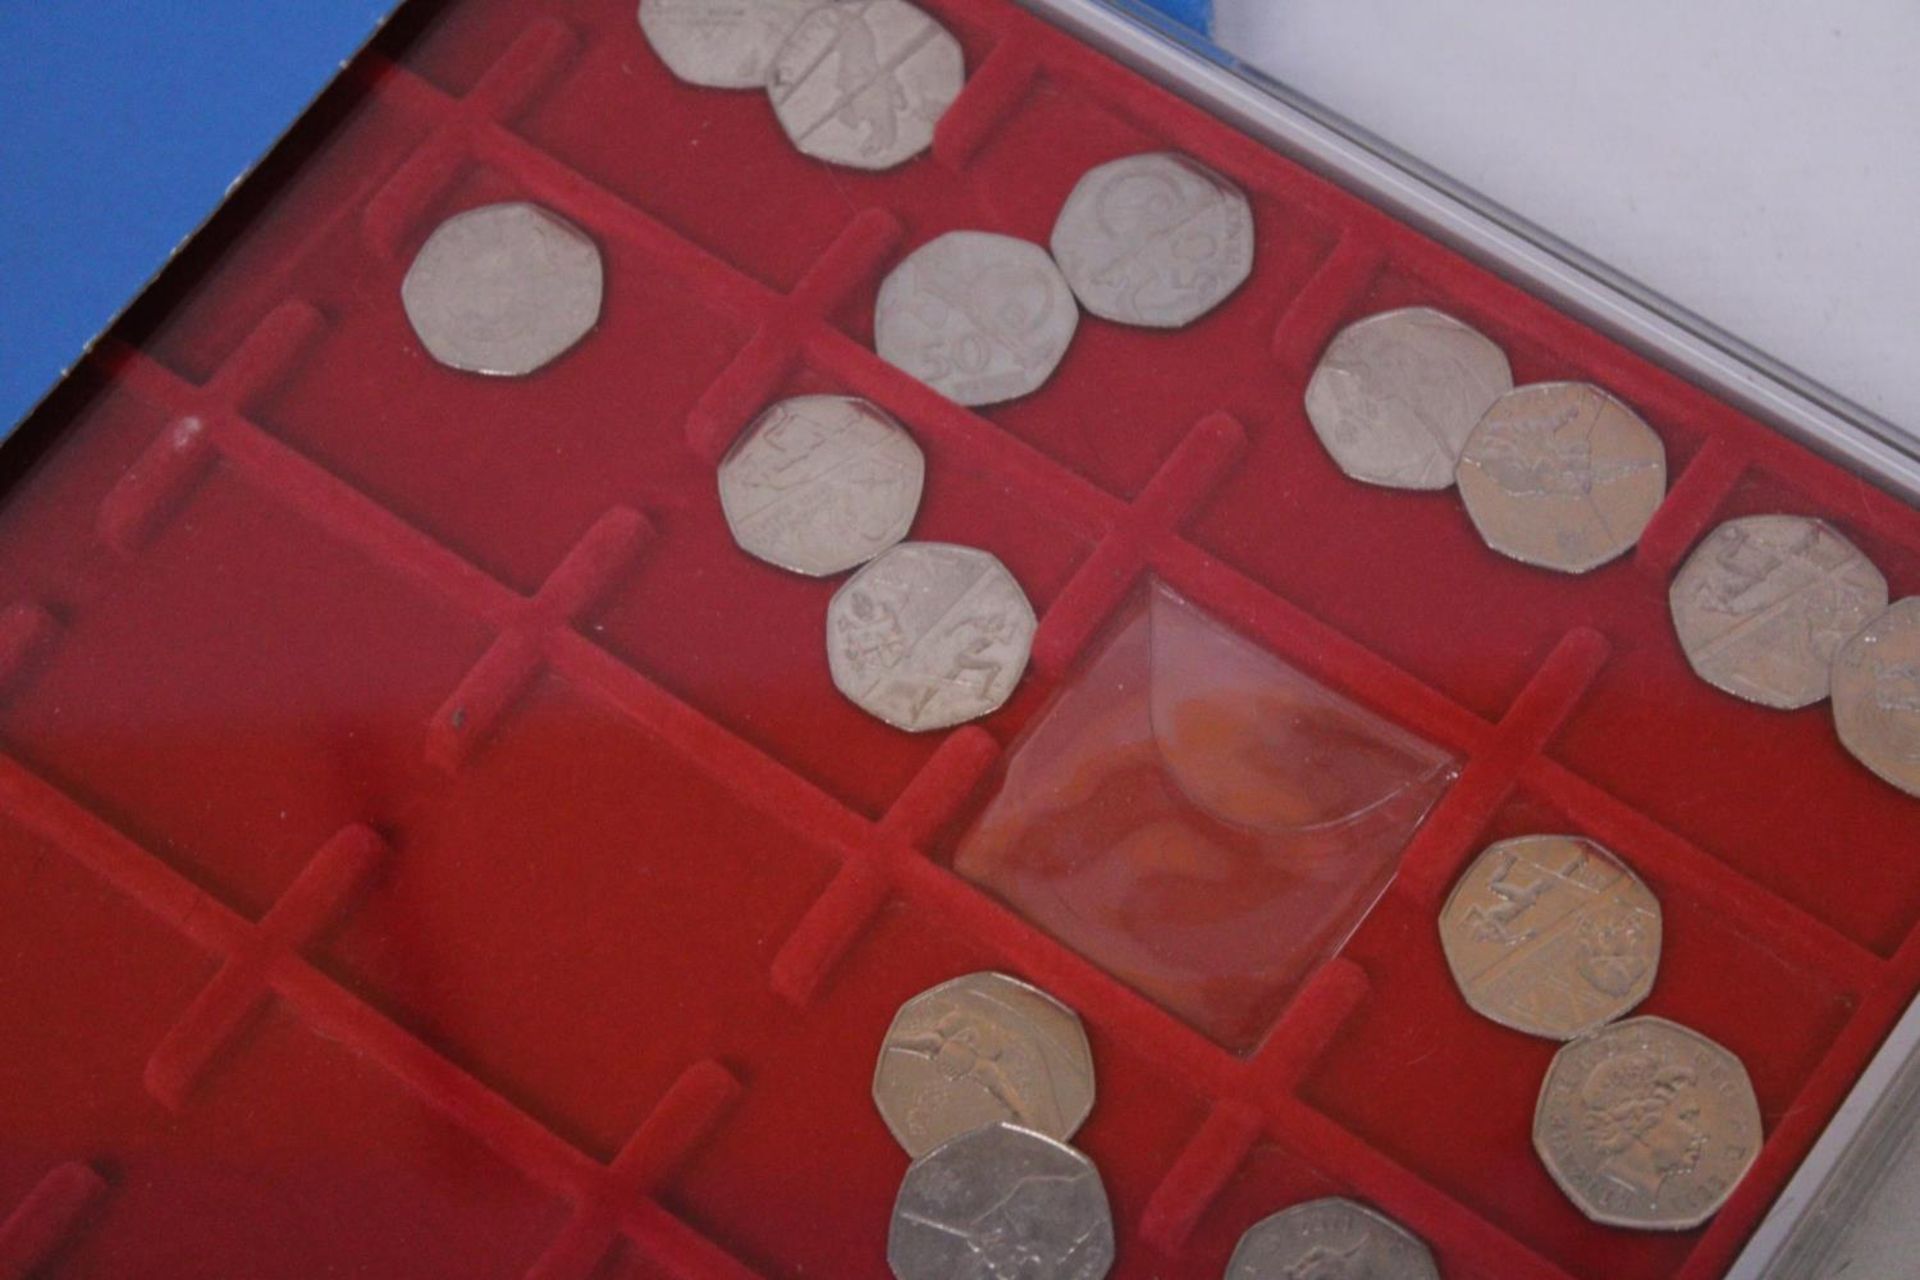 UK 50P COIN COLLECTION ARRANGED IN THREE LINDNER TRAYS 68 IN TOTAL ,UNCHECKED, CAREFUL EXAMINATION - Image 4 of 7